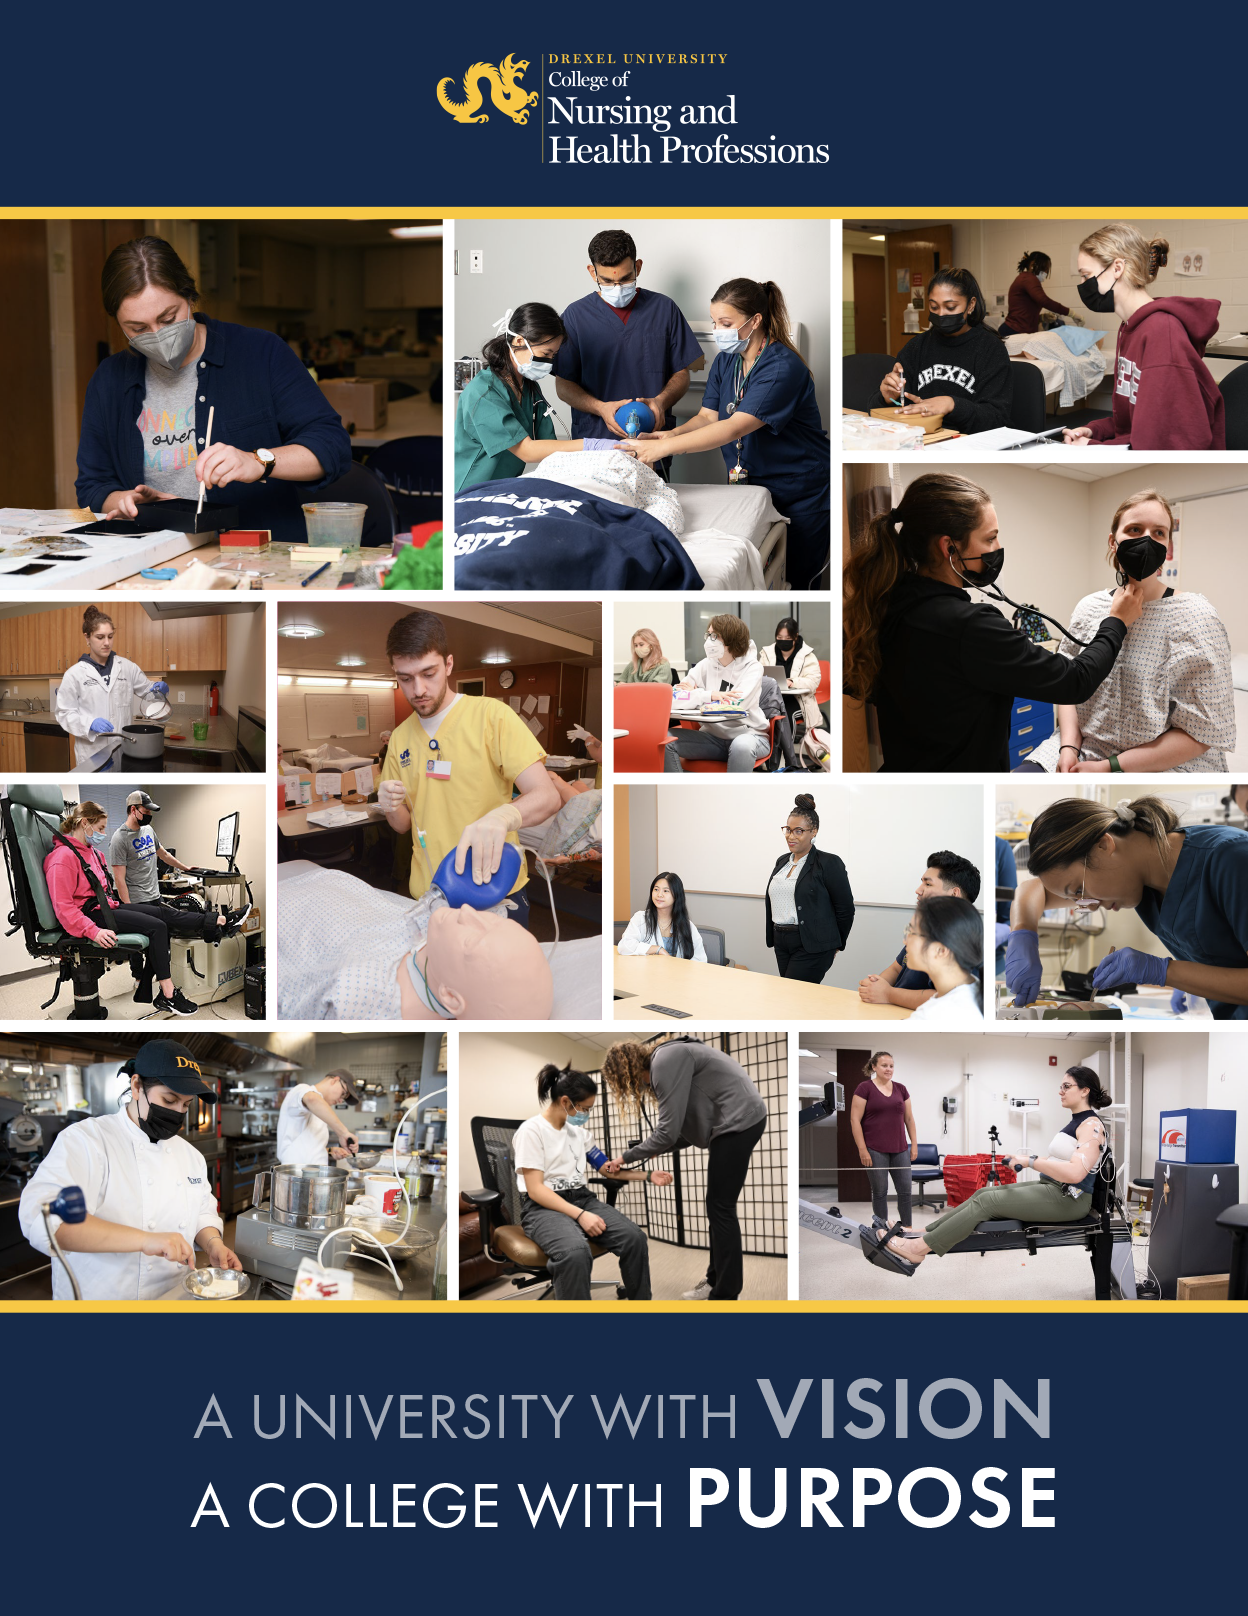 Student Viewbook Cover Showing Center City Philadelphia